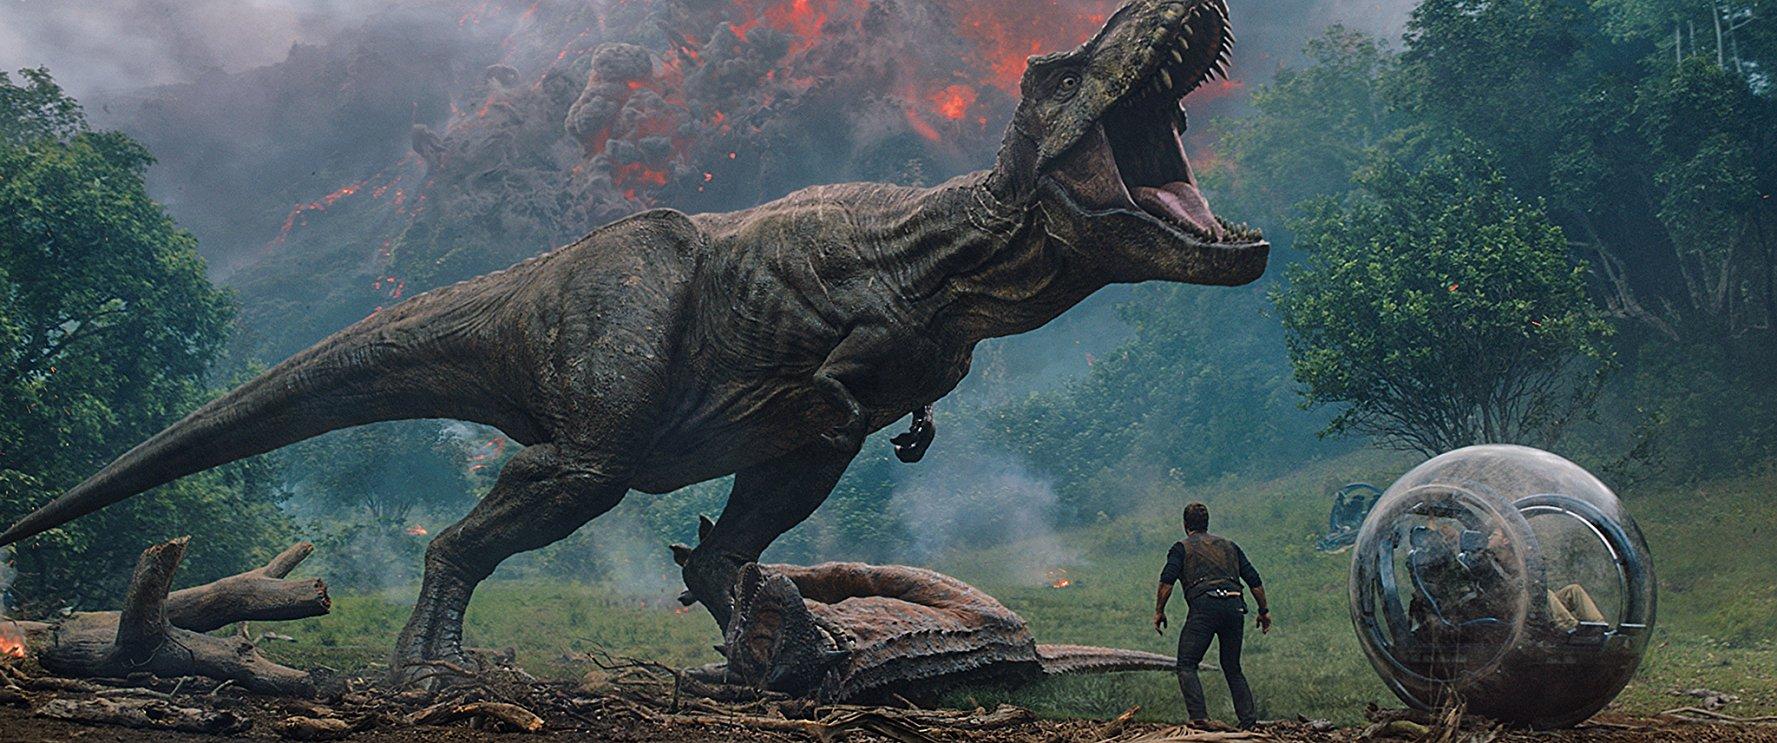 The Park is Gone – Watch the Explosive and Spoilerific Final Trailer for  'Jurassic World: Fallen Kingdom' Now!